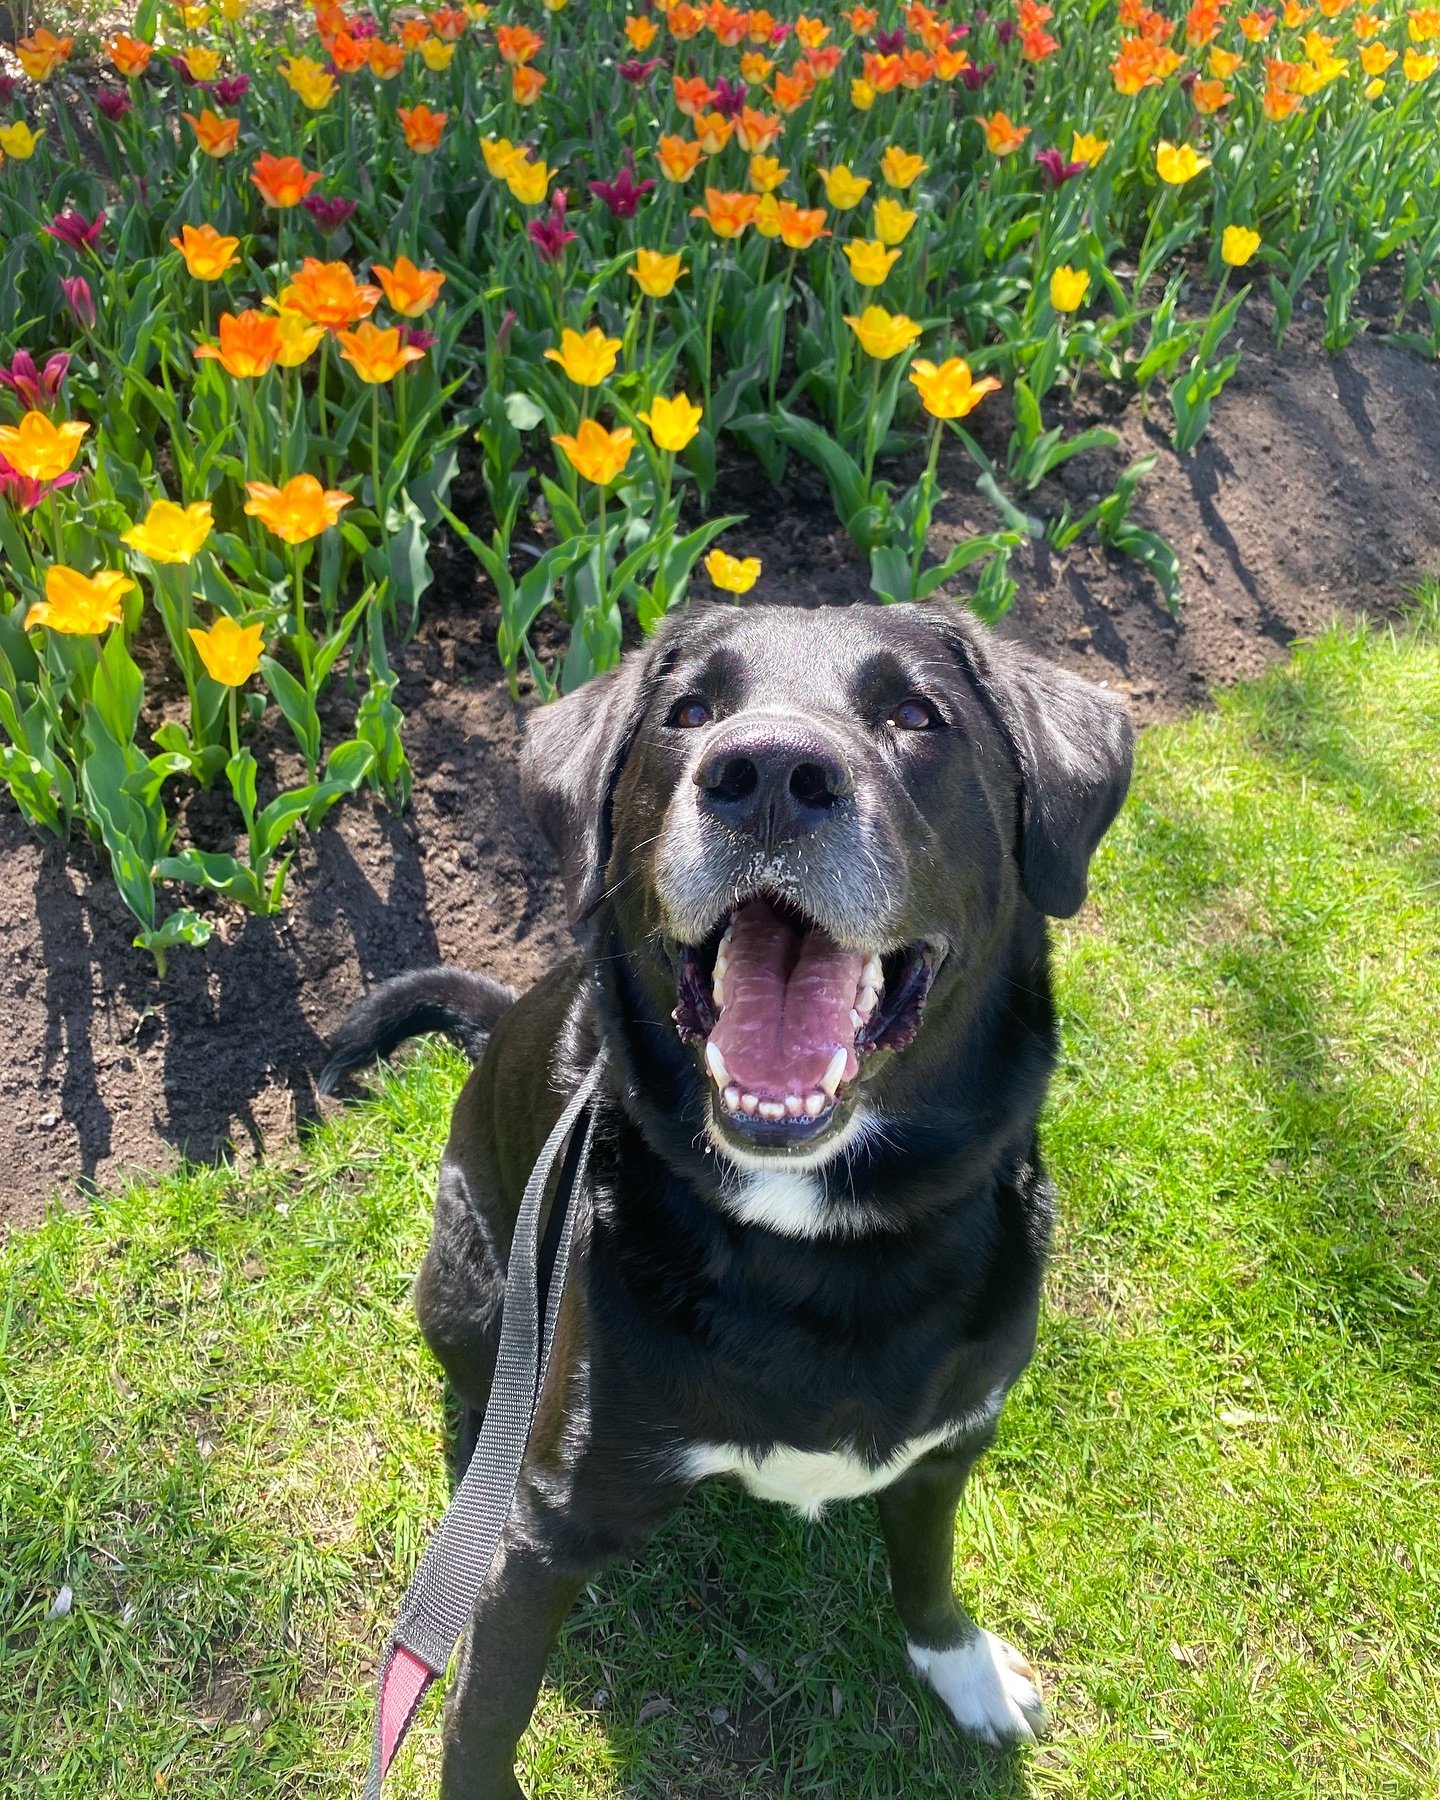 💐 HAPPY DOG MOM DAY!

🩷 To the ones who always play fetch the best: dog moms - you are the queens of the leash, the guardians of treats, and the masters of belly rubs. 

🦮 Wishing you a great Dog Mom Day (celebrated on May 11th, the day before Hoo